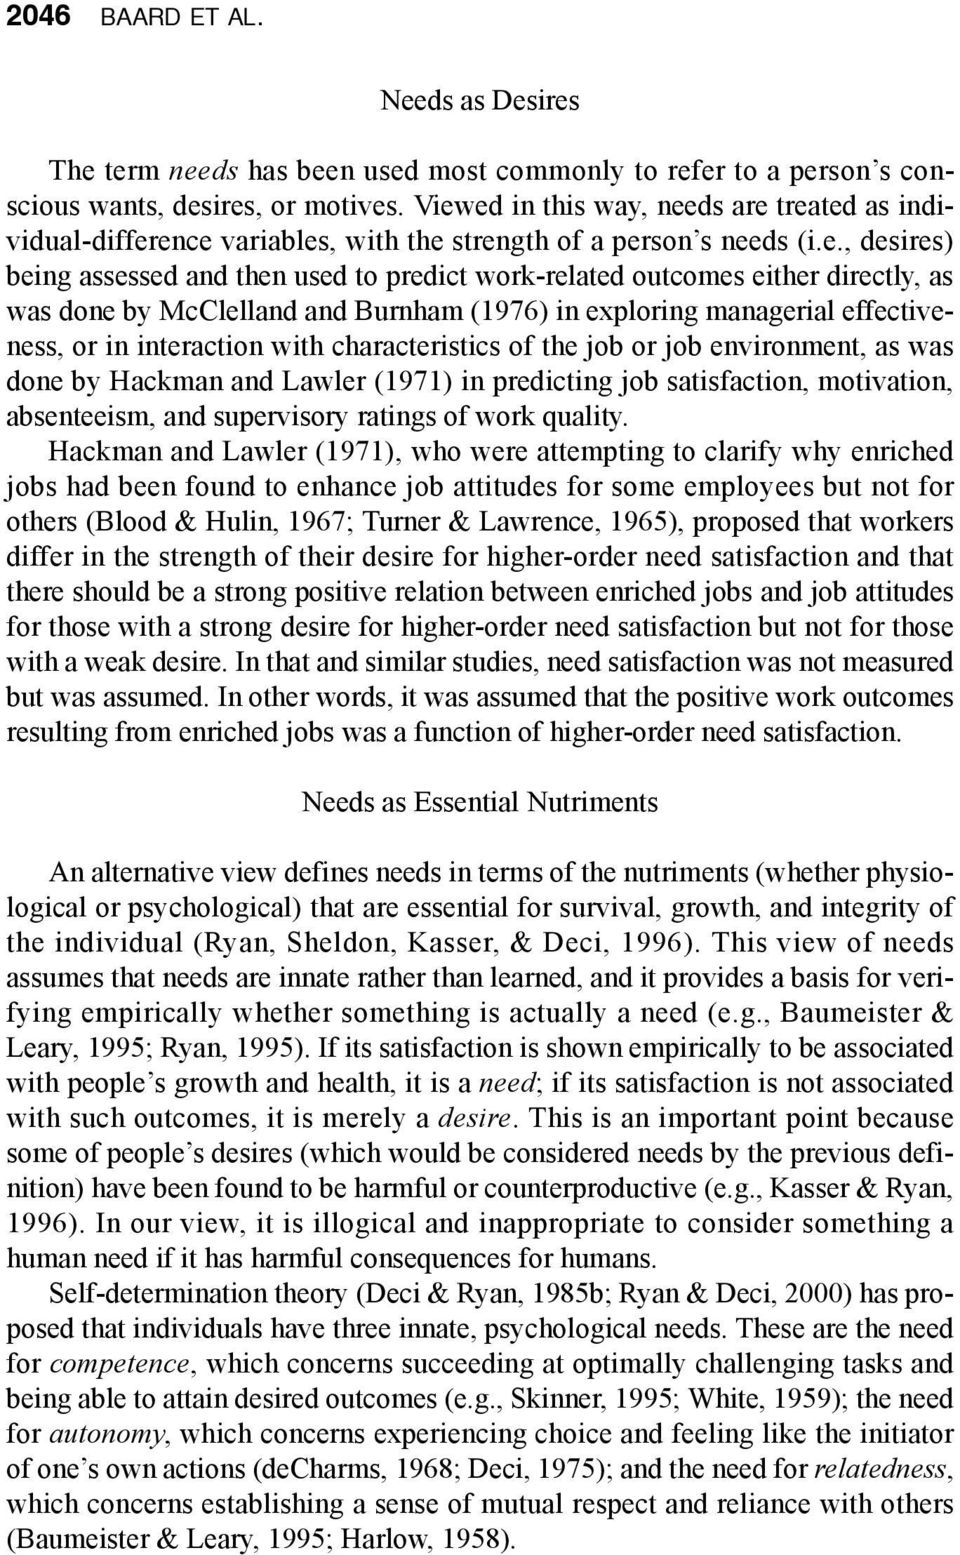 directly, as was done by McClelland and Burnham (1976) in exploring managerial effectiveness, or in interaction with characteristics of the job or job environment, as was done by Hackman and Lawler